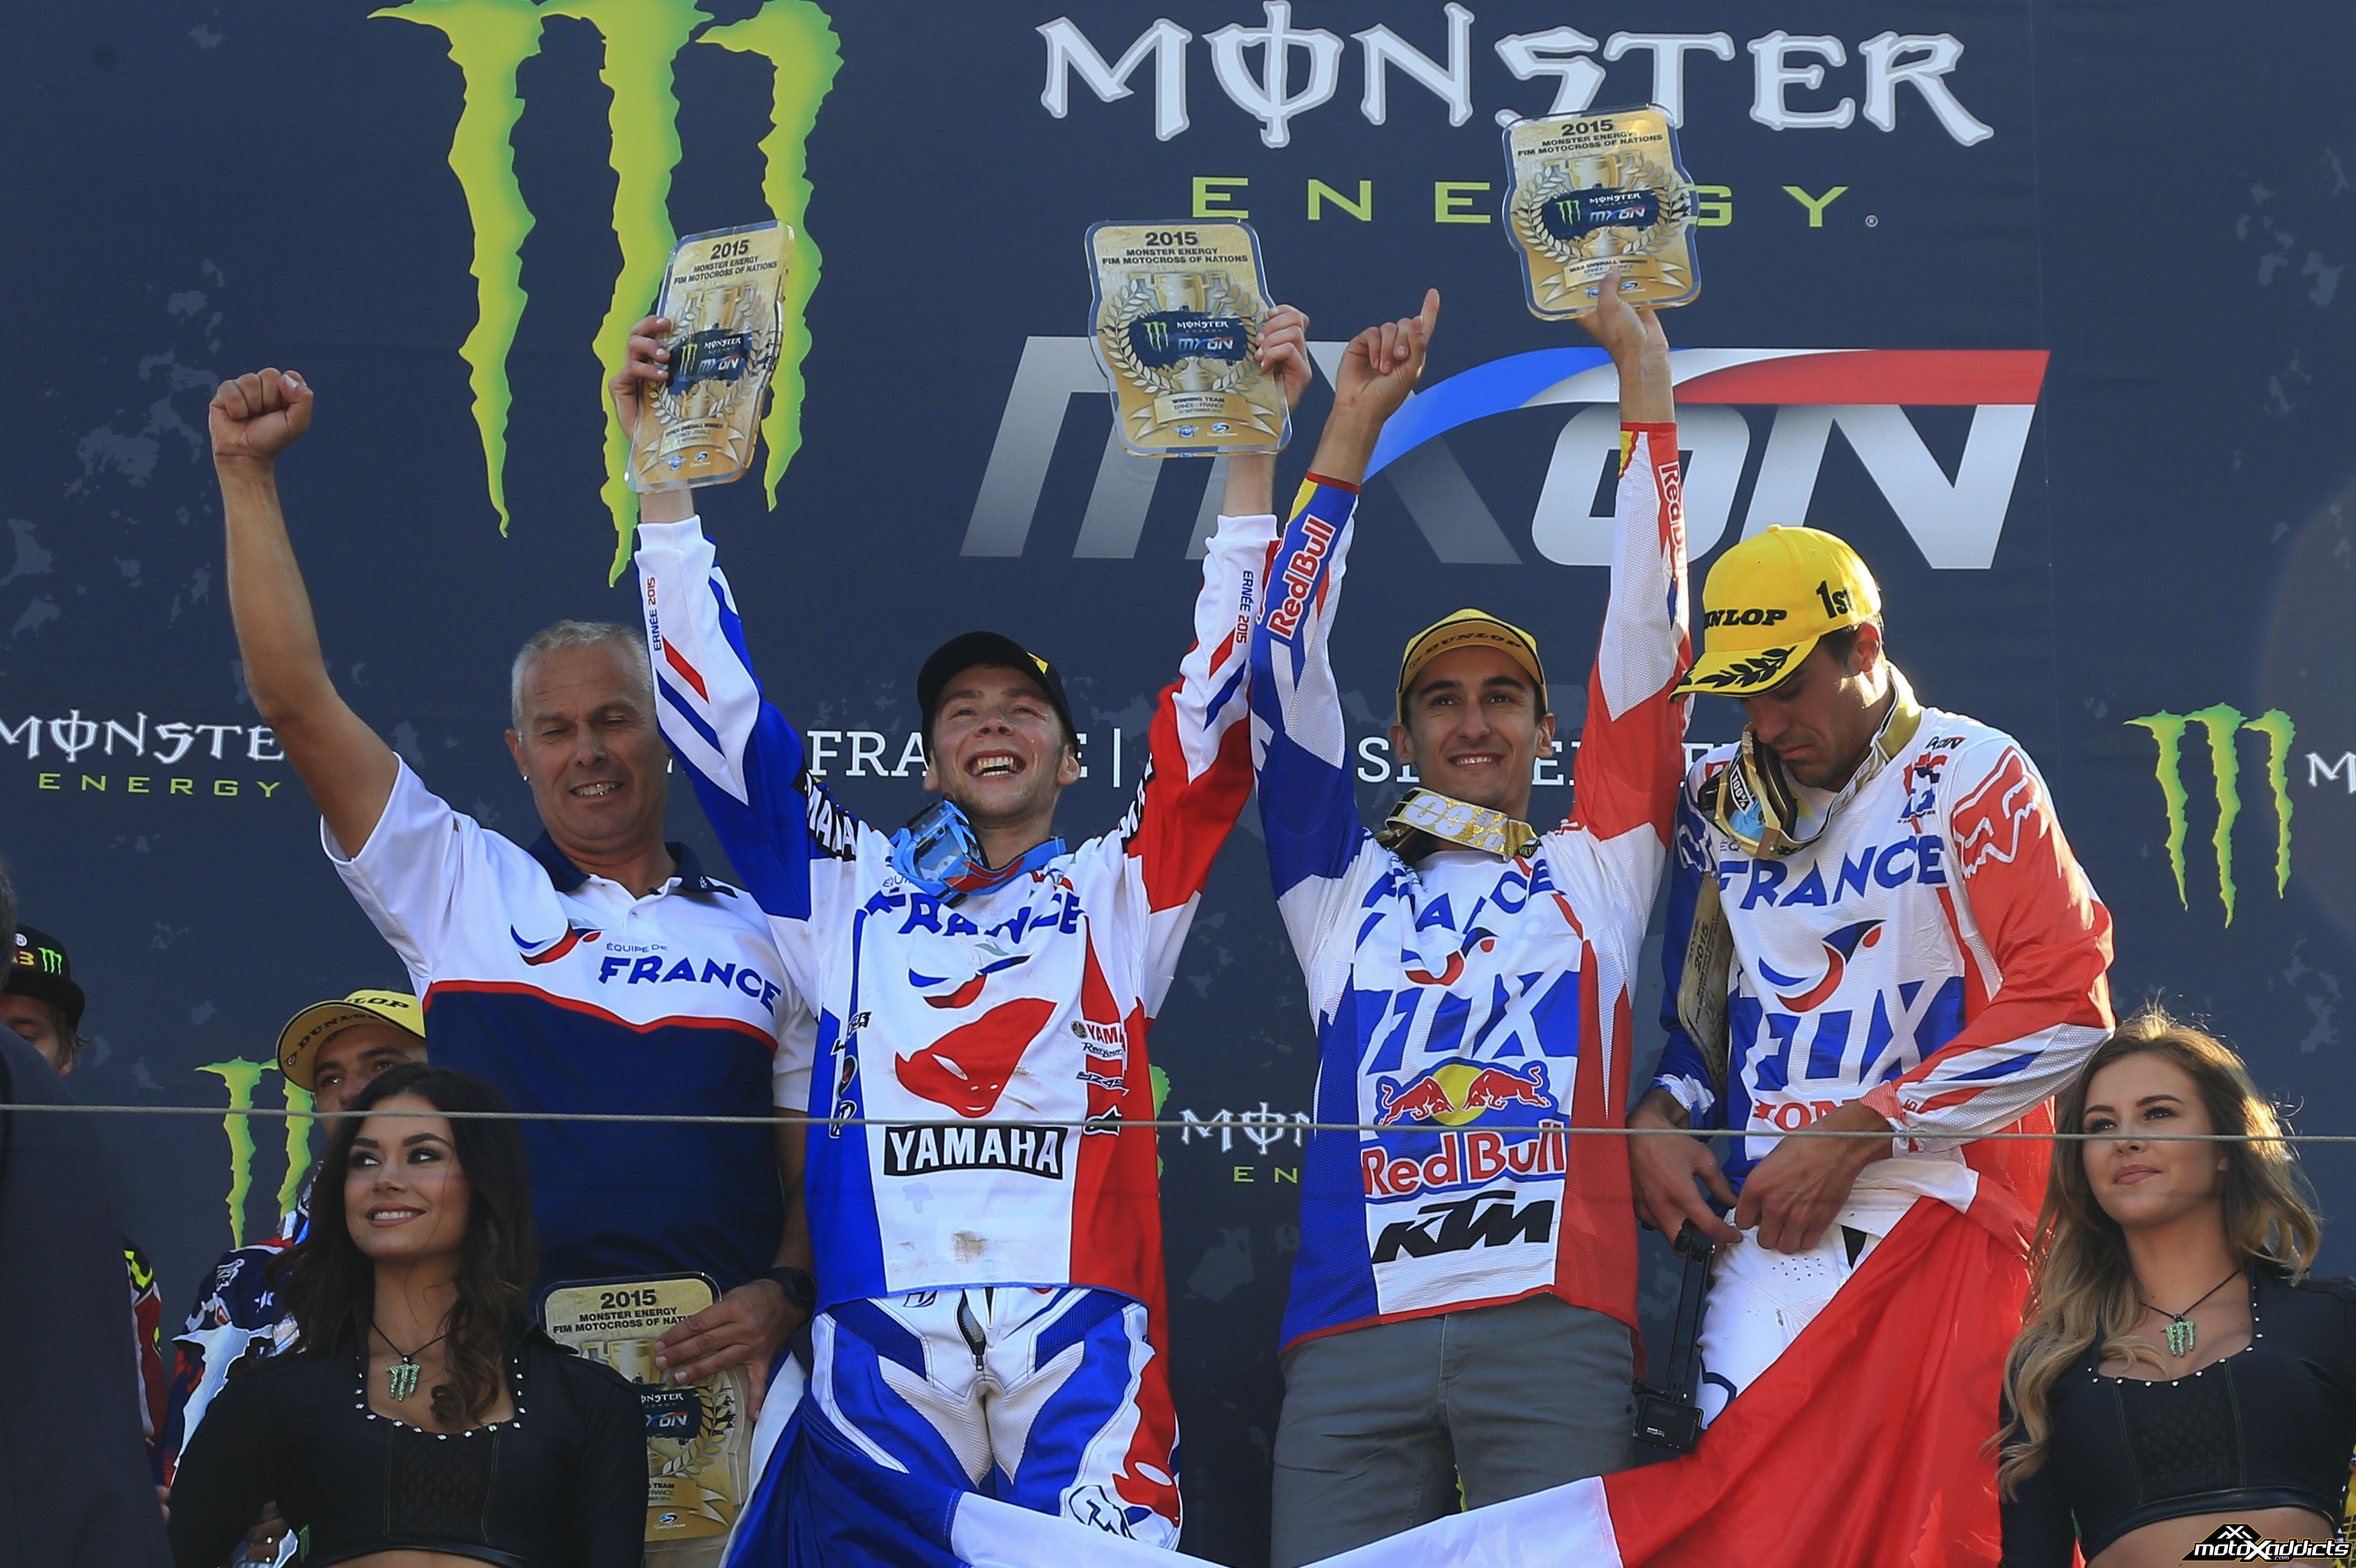 Romain (Team France rider on left) helped lead Team France to a victory with the only 1-1 score of the 2015 MXoN. 